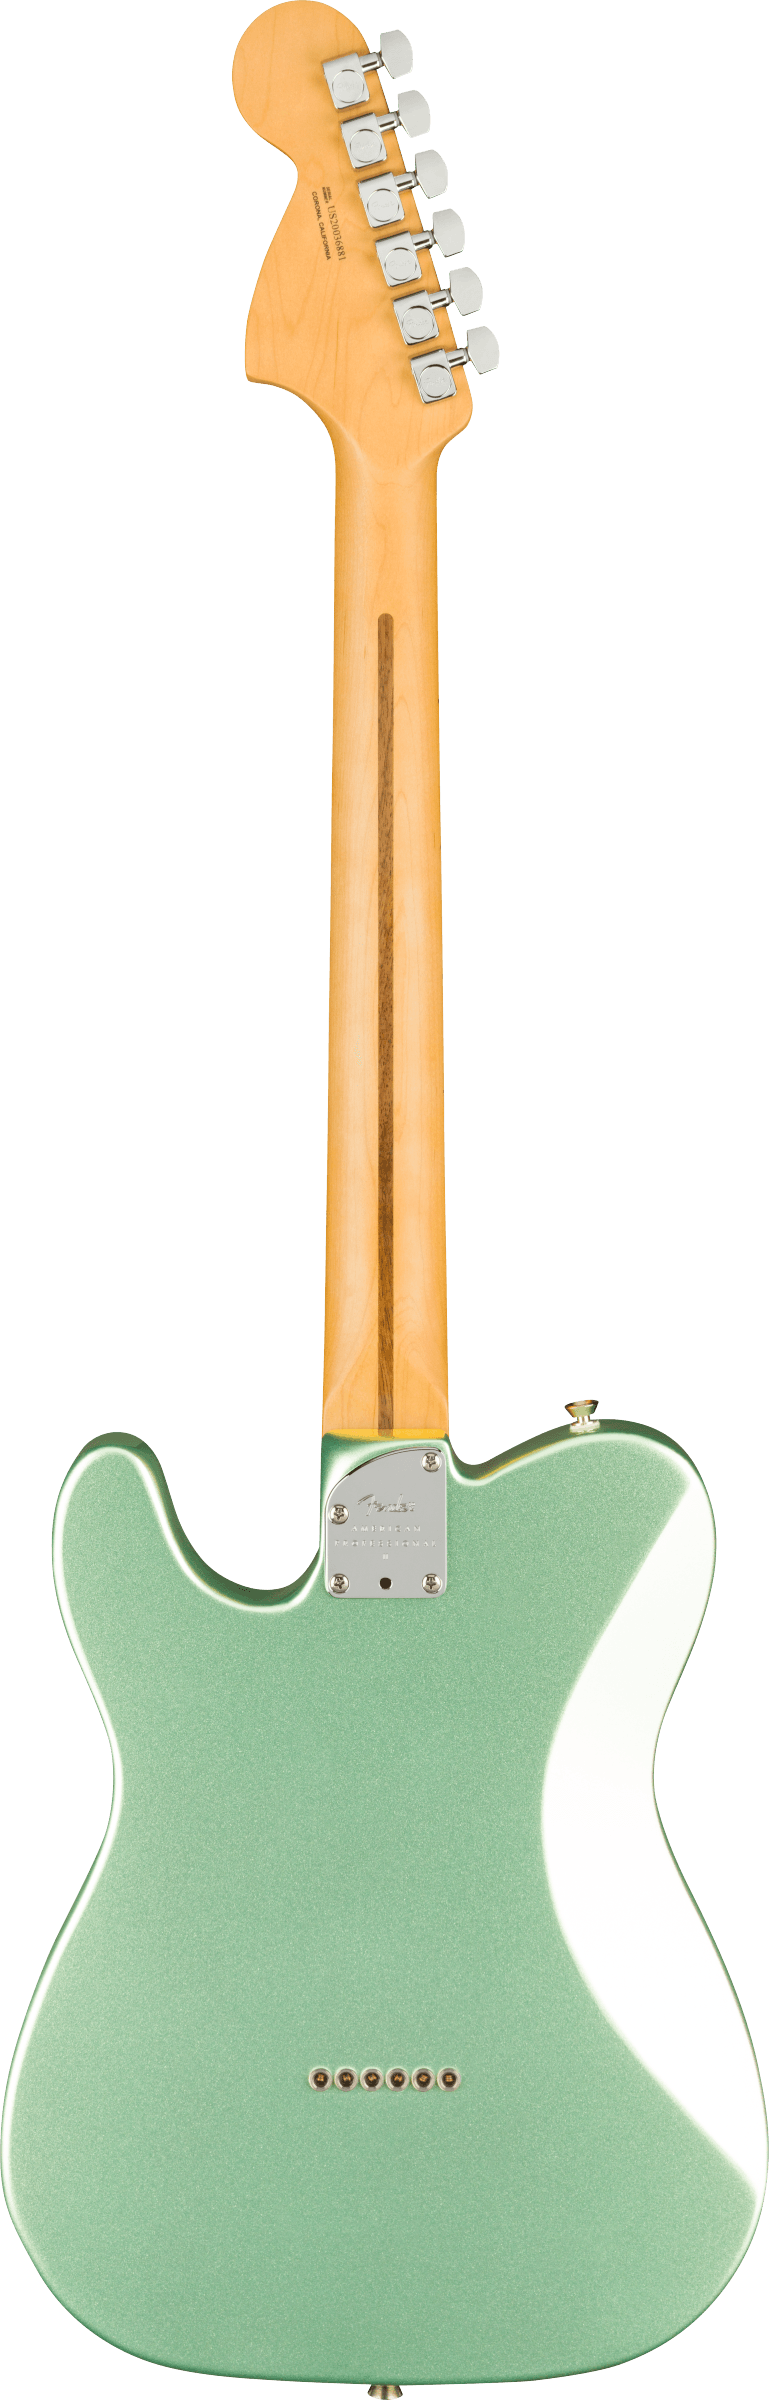 American Professional II Telecaster Deluxe Maple Fingerboard, Mystic Surf Green